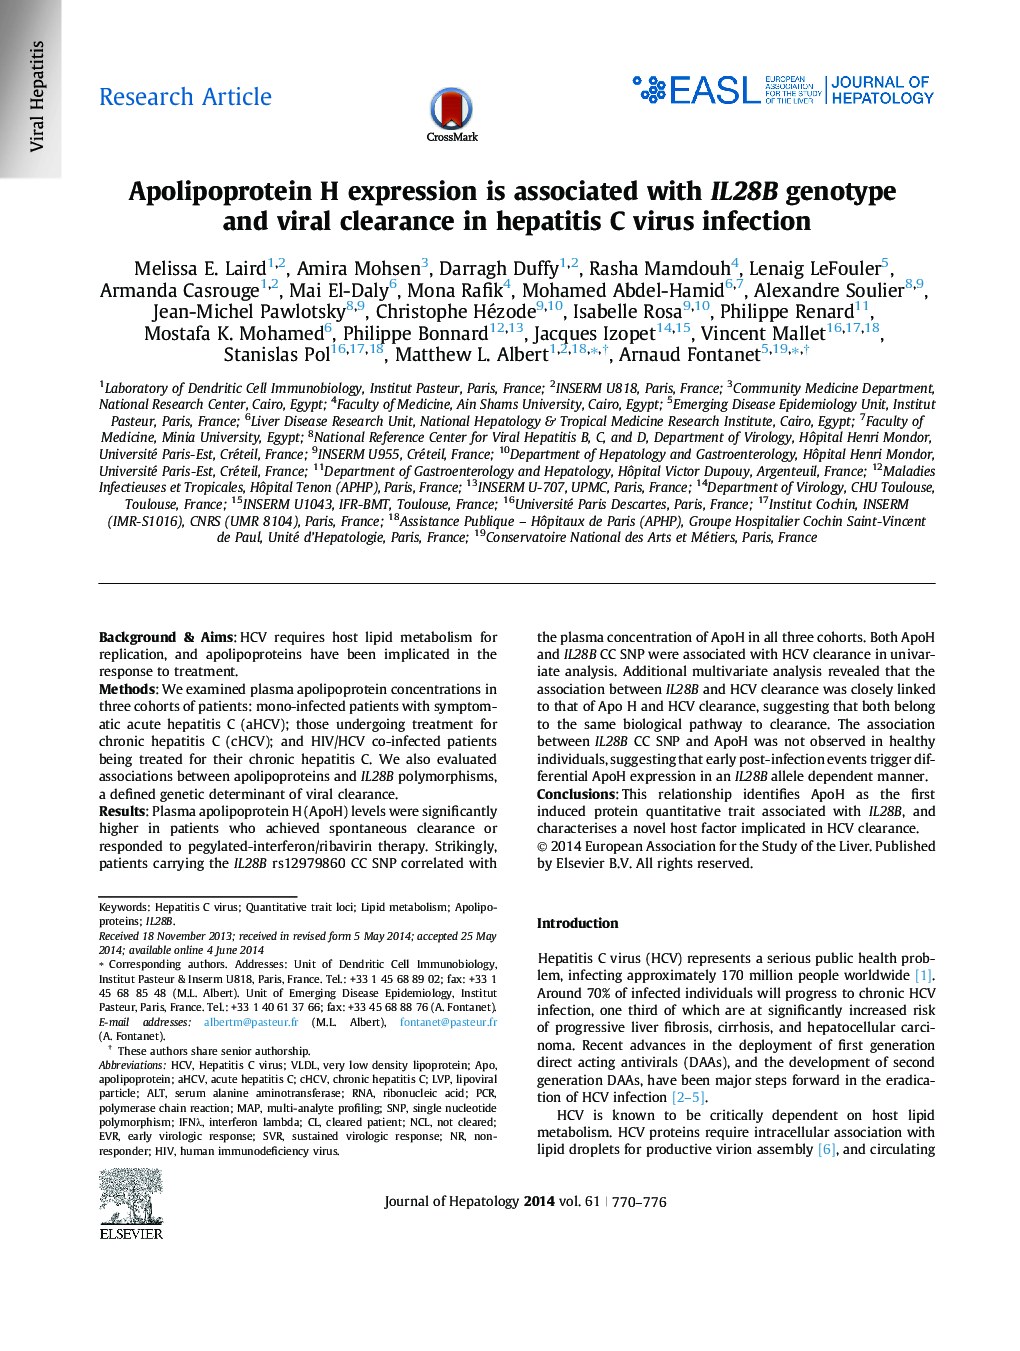 Research ArticleApolipoprotein H expression is associated with IL28B genotype and viral clearance in hepatitis C virus infection